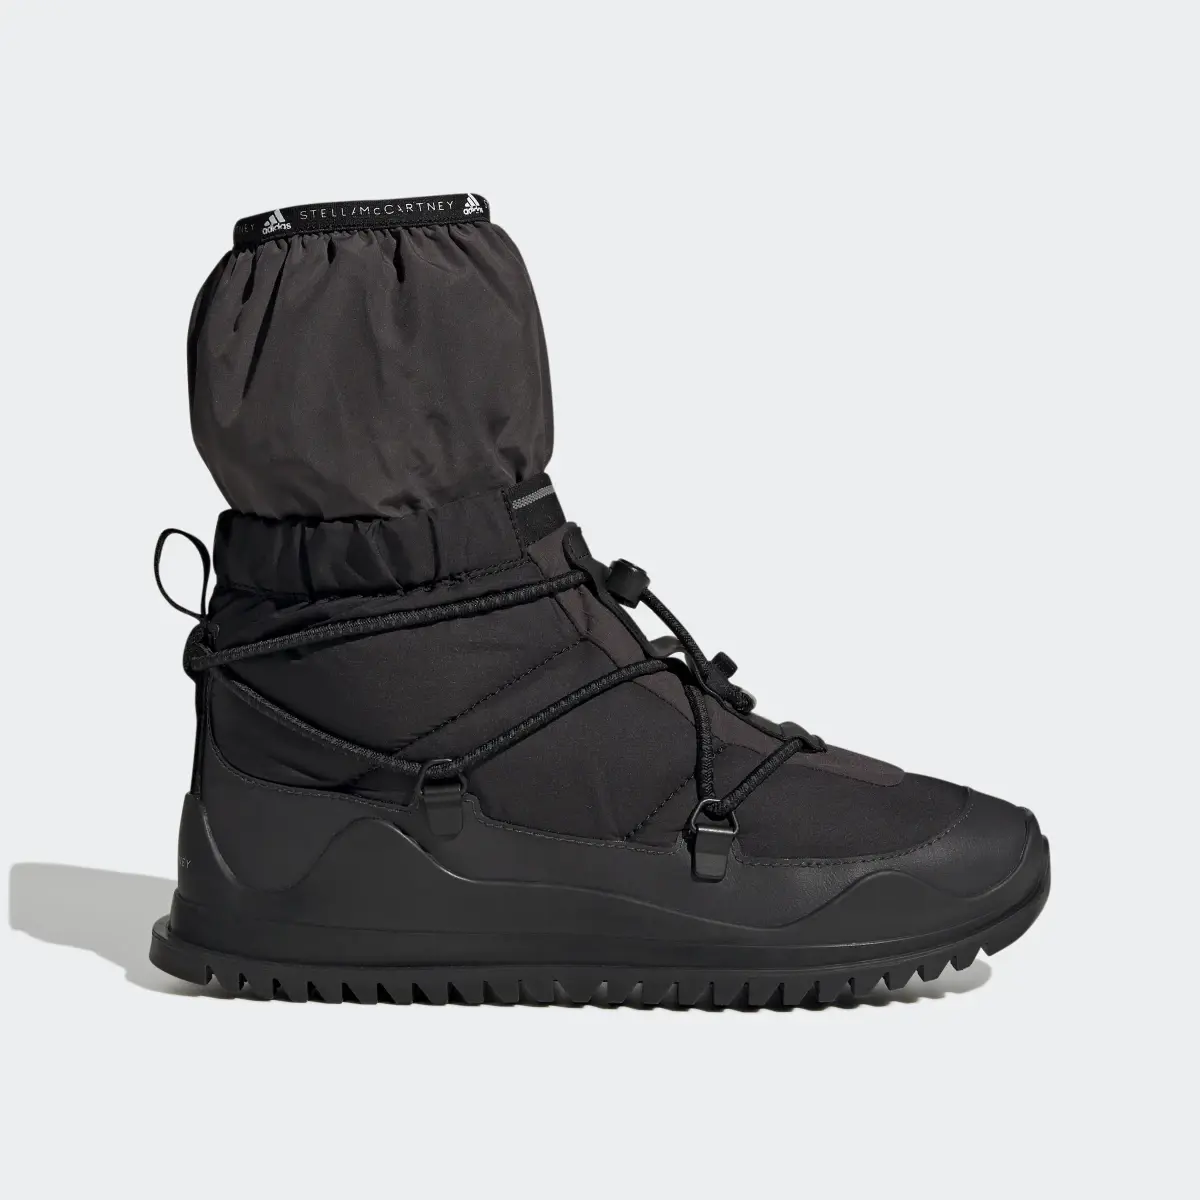 Adidas by Stella McCartney COLD.RDY Winter Boots. 2